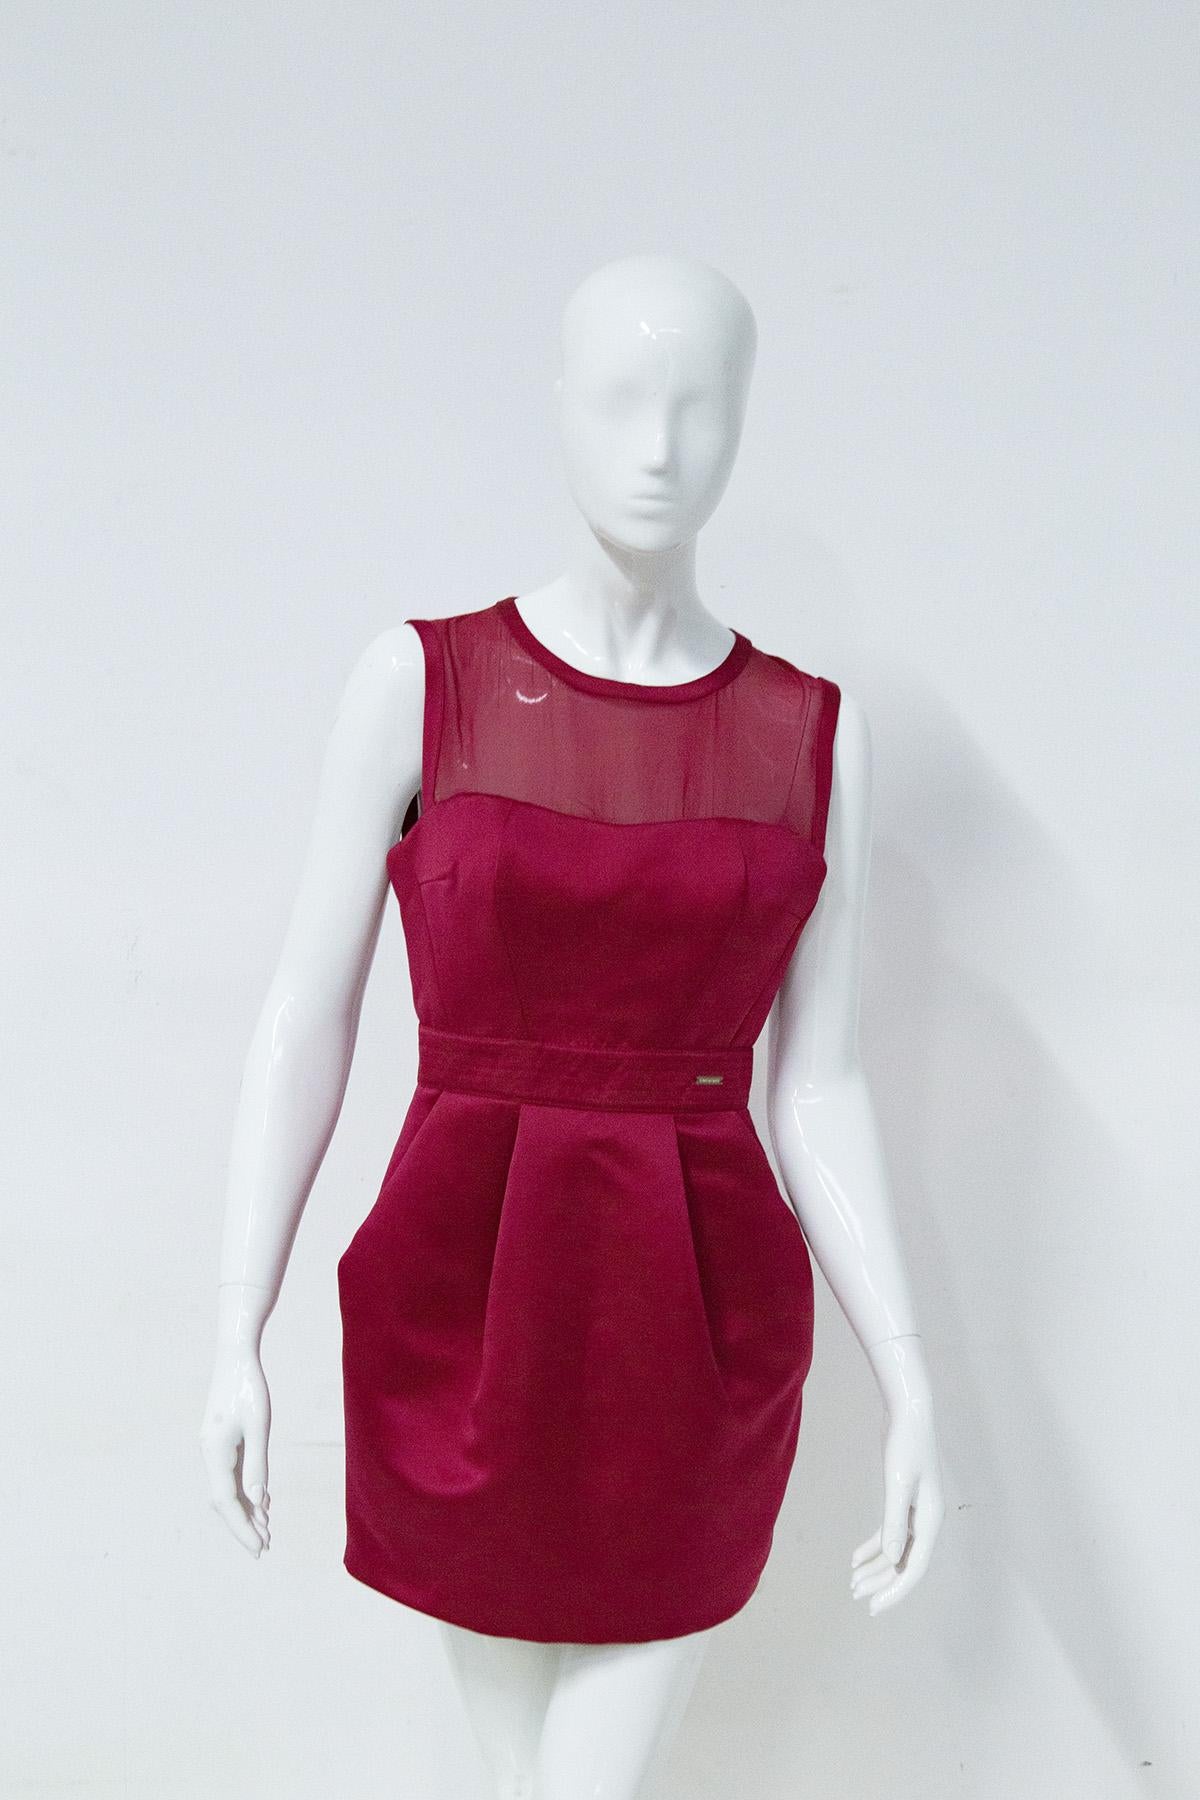 Elisabetta Franchi fuchsia cocktail dress from the 2010s. The dress is made of polyester and stretch fabric with puffs in the skirt that pick up its side pockets. The bodice made in the shape of a heart and is finished on the chest with a tolle also